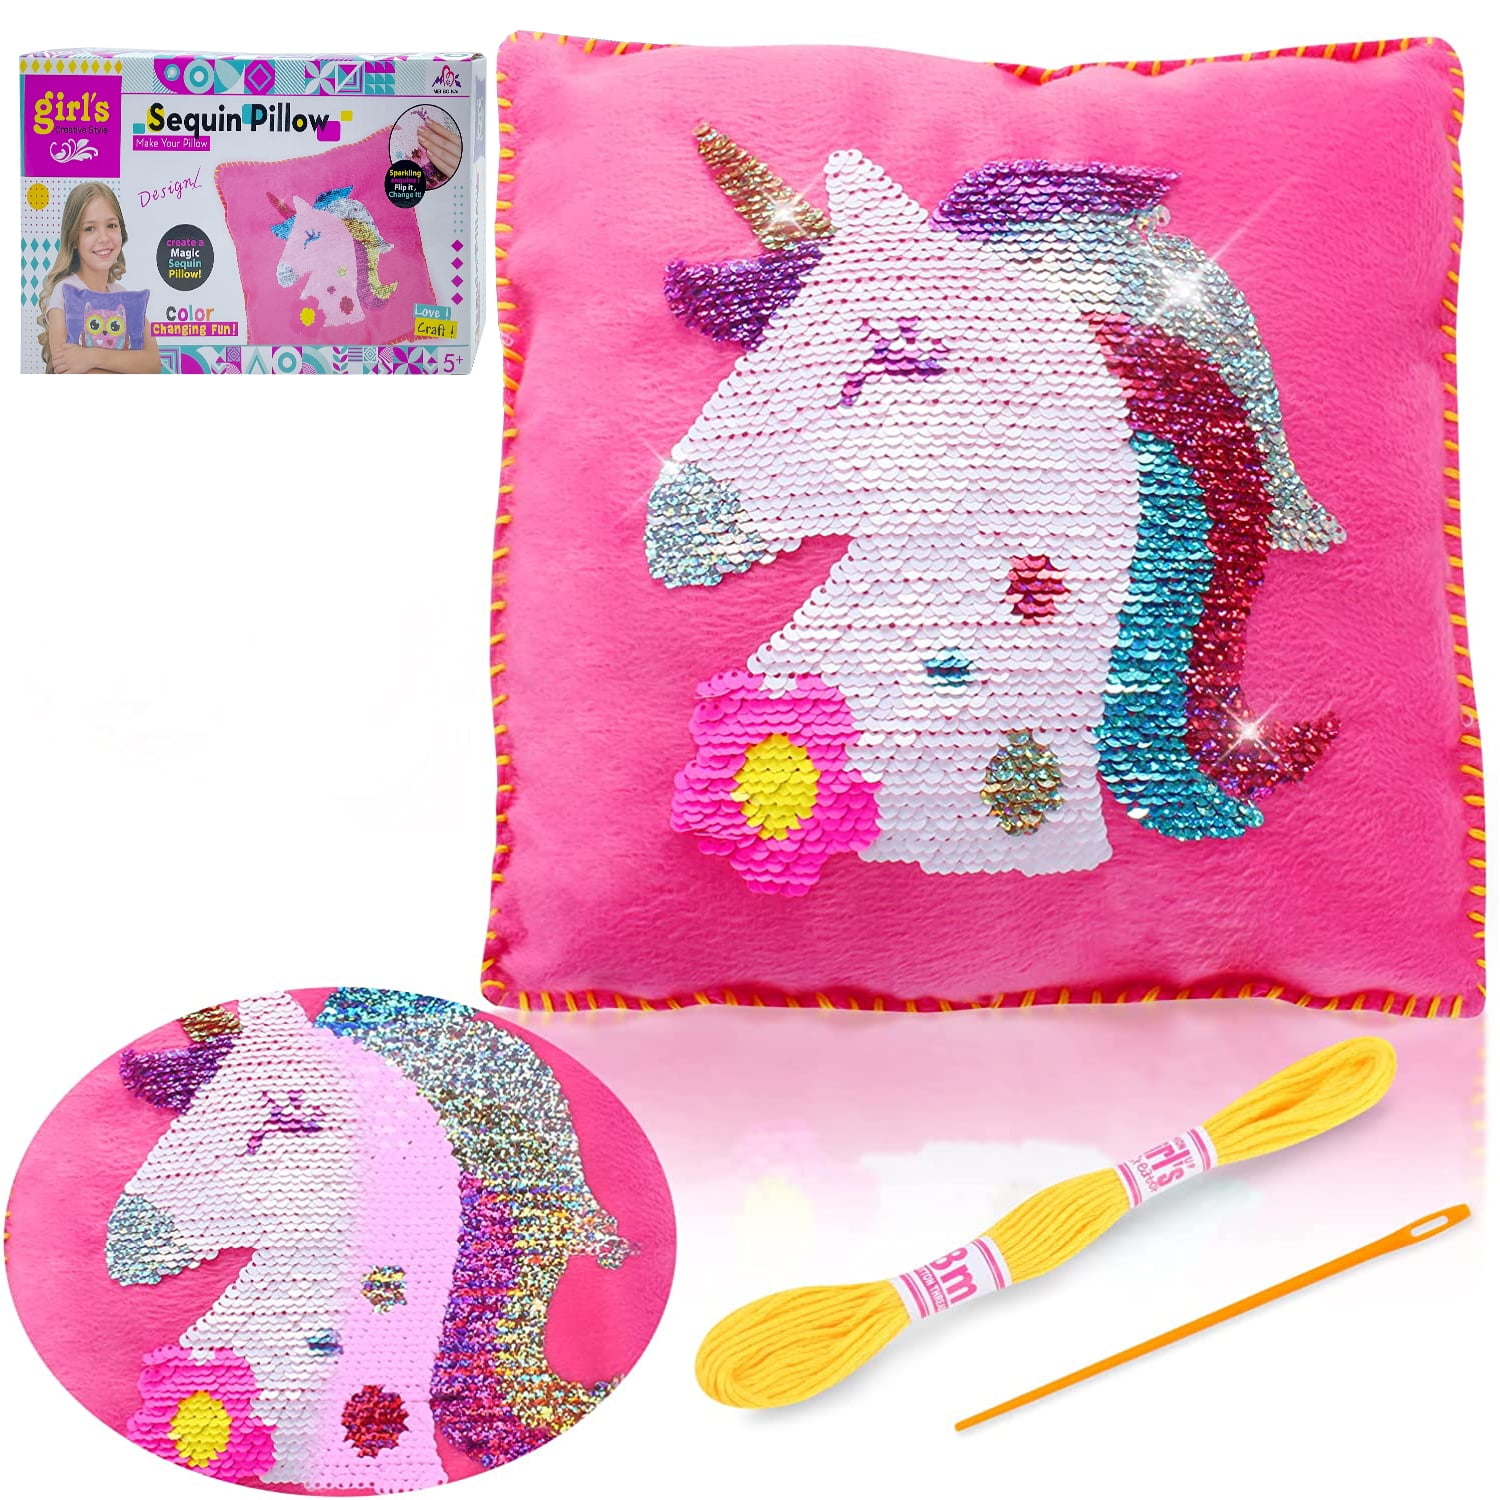 Coola coola sewing kit for kids ages 8-12, craft kits for kids